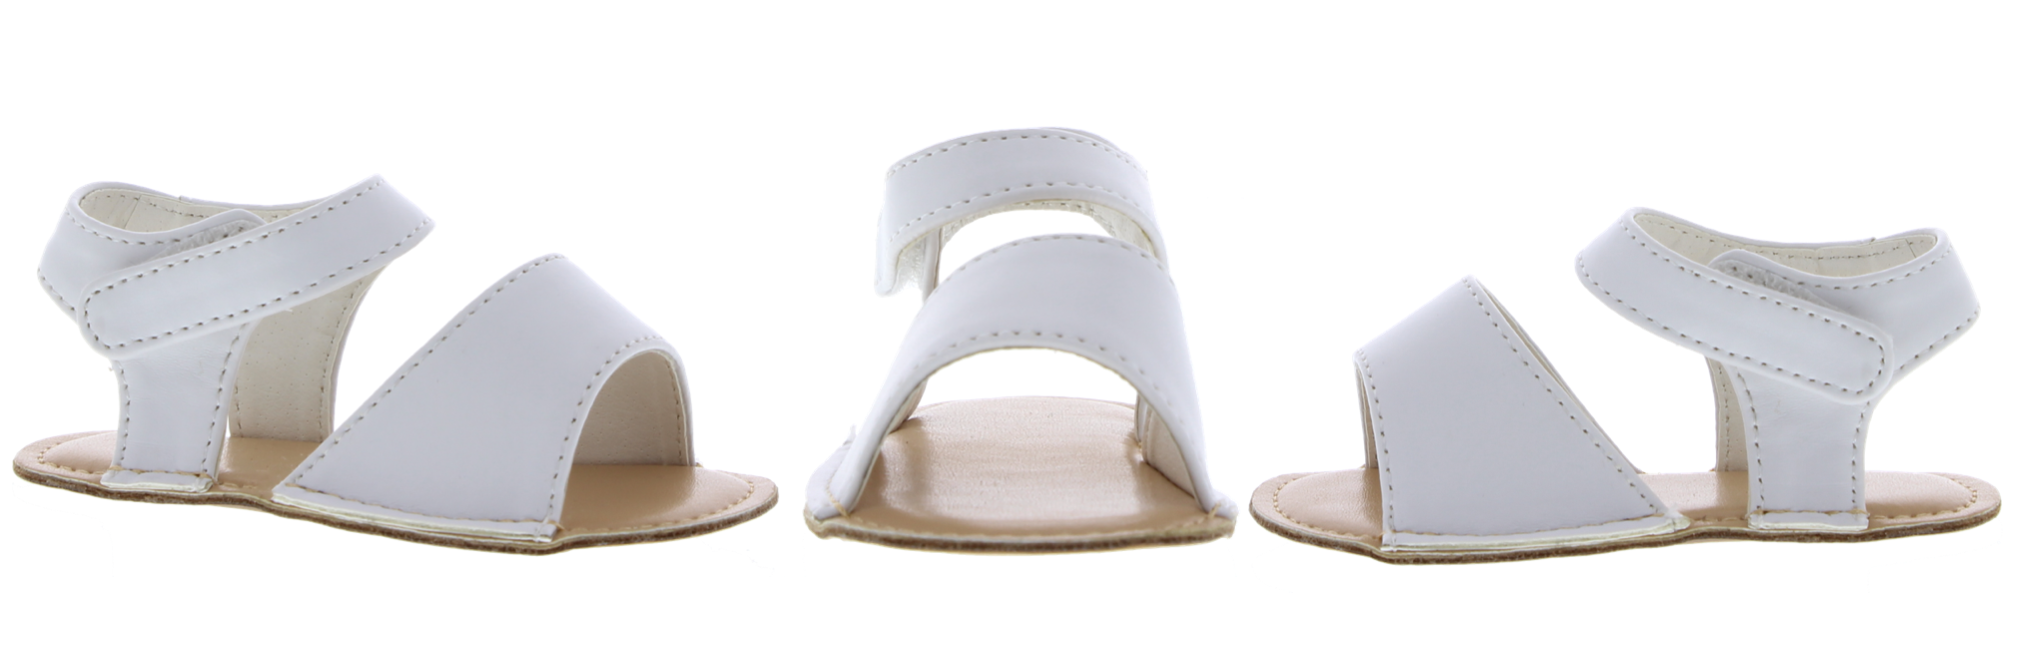 Baby Sandal with Velcro Closure